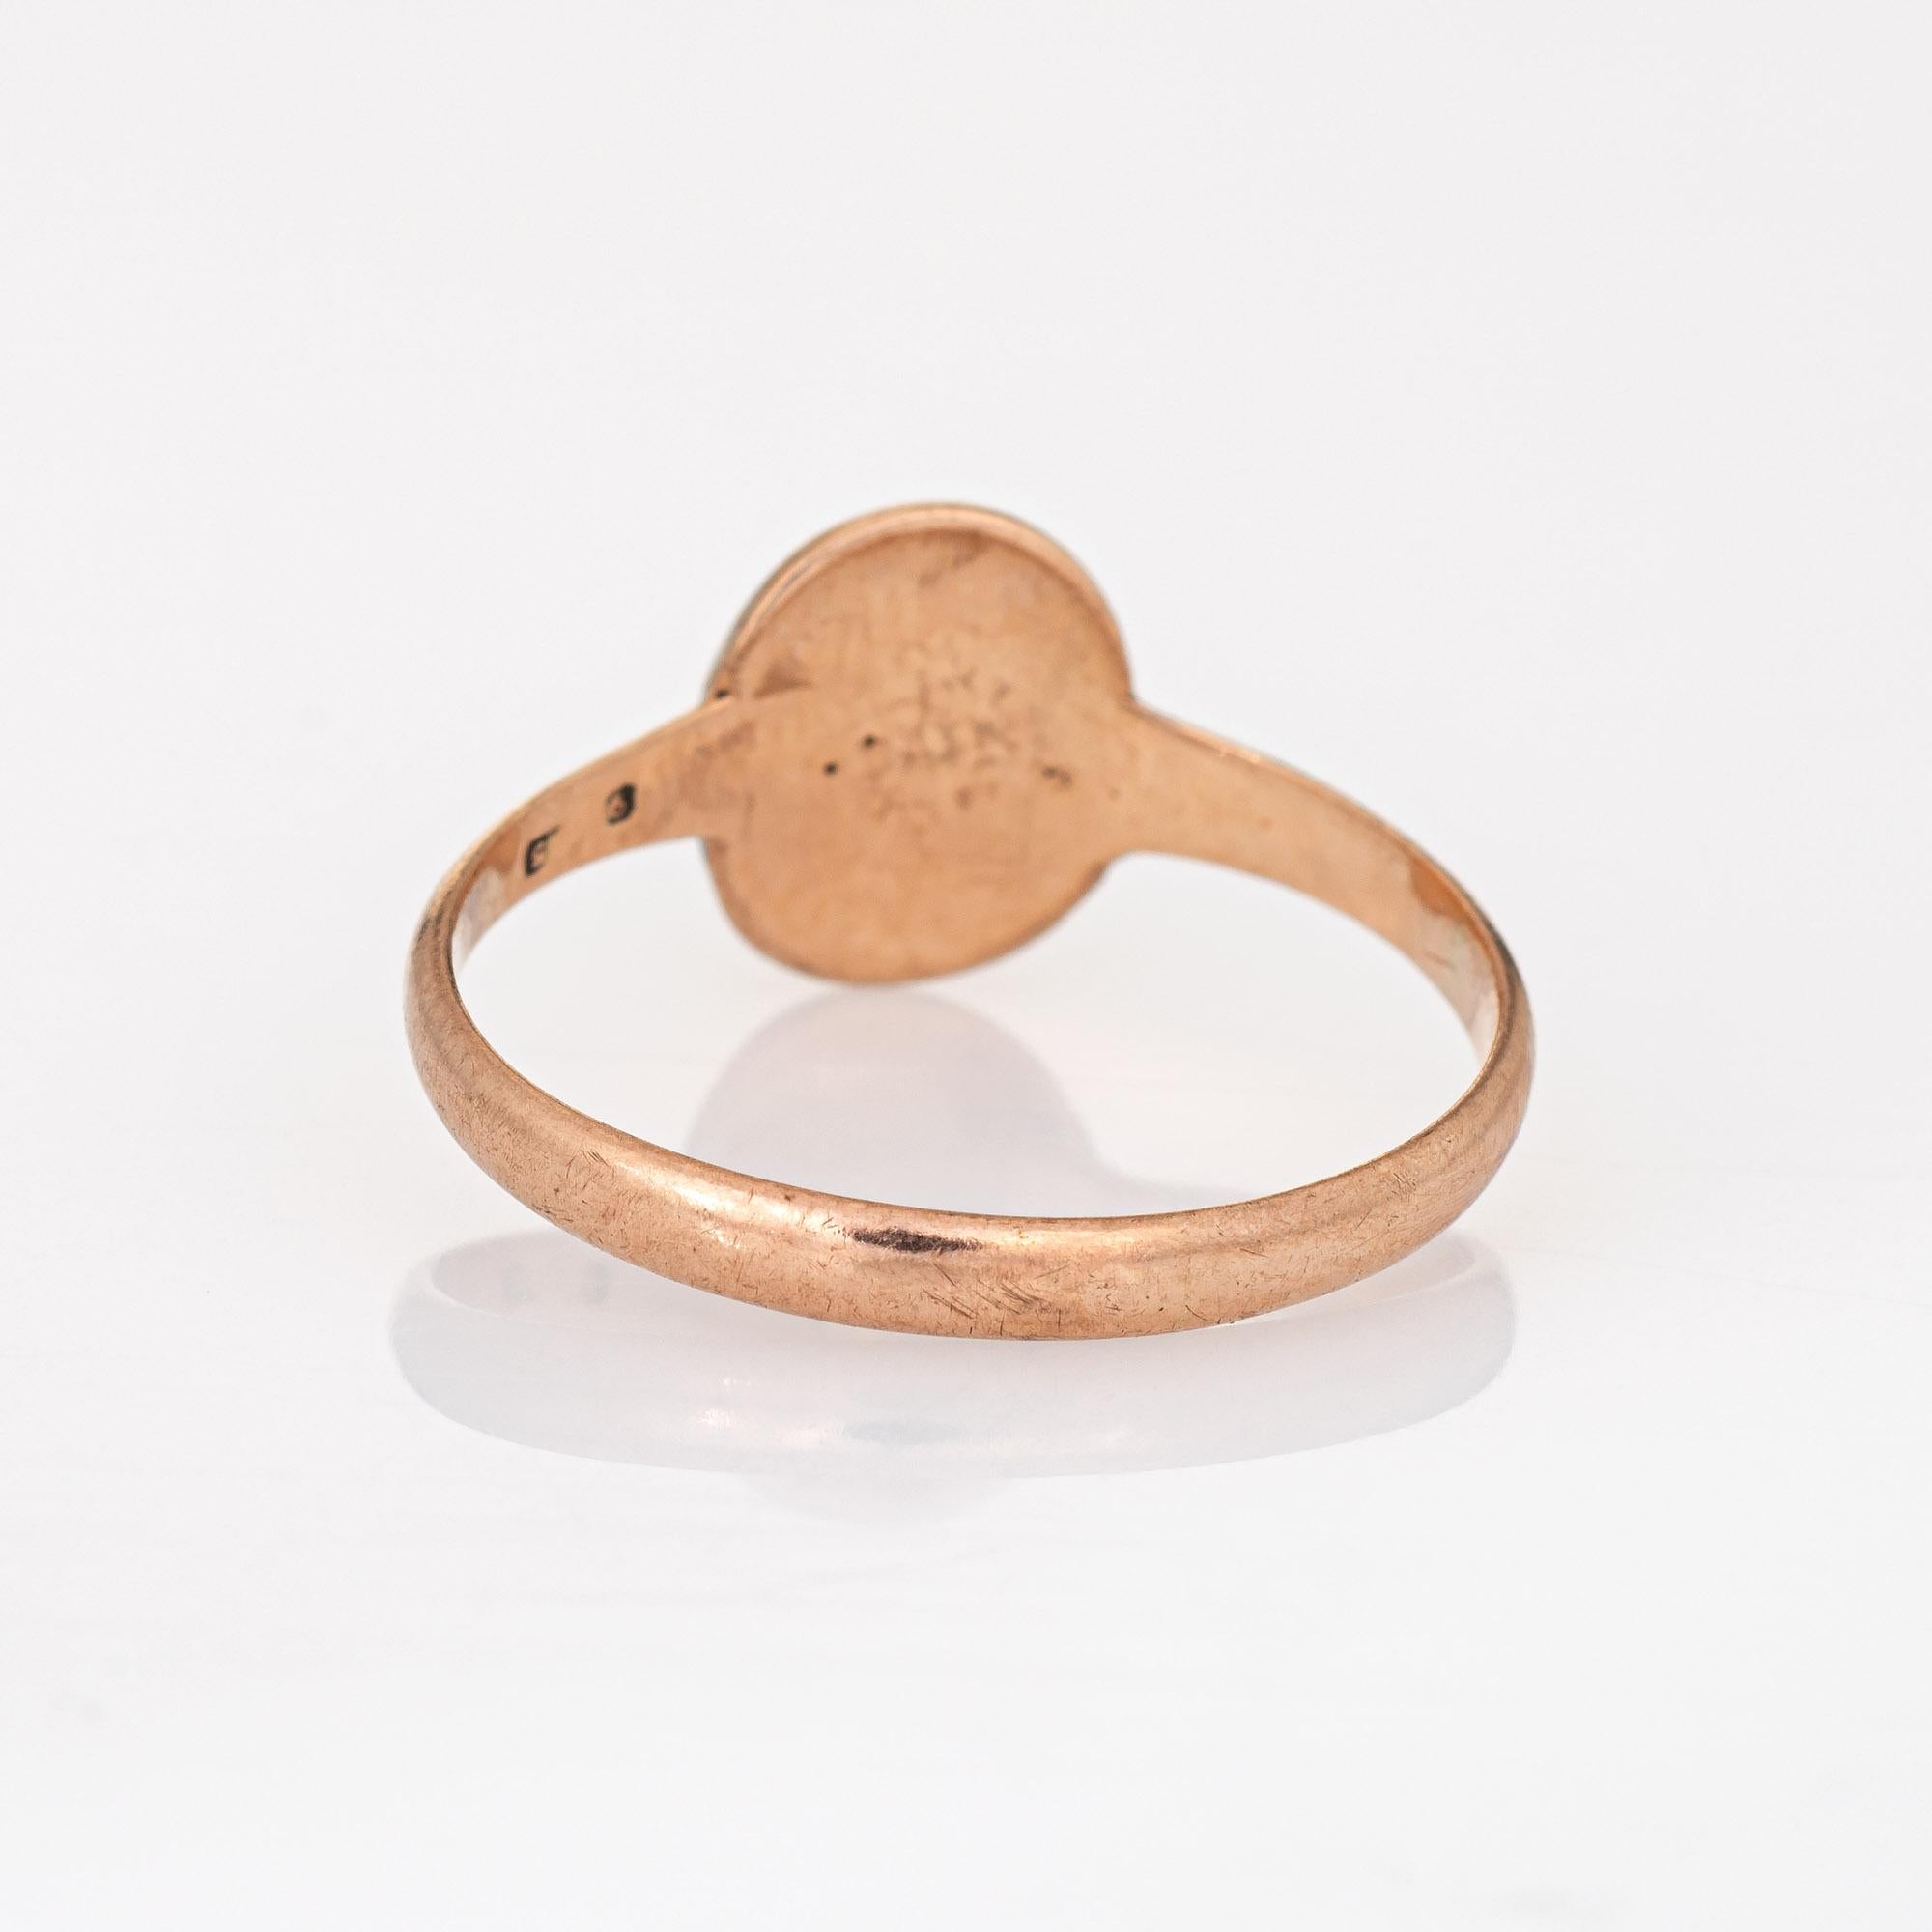 Vintage 1923 Art Deco Signet Ring Small Oval 9k Rose Gold Child Jewelry In Good Condition For Sale In Torrance, CA